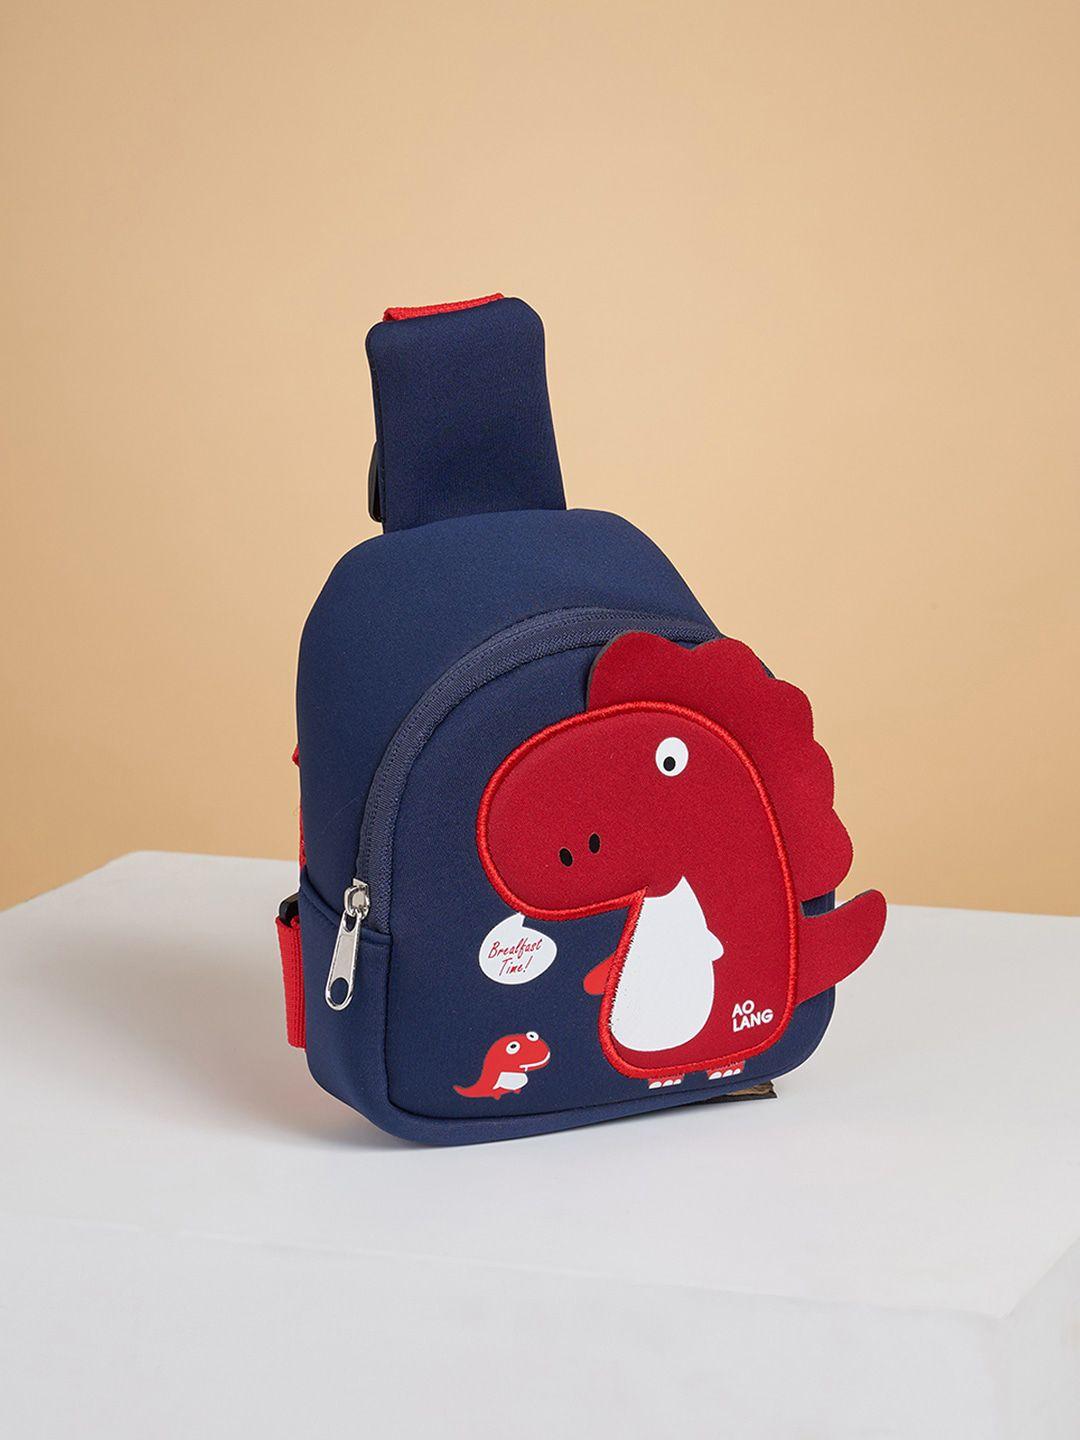 pantaloons junior boys crossbody backpack with applique detail